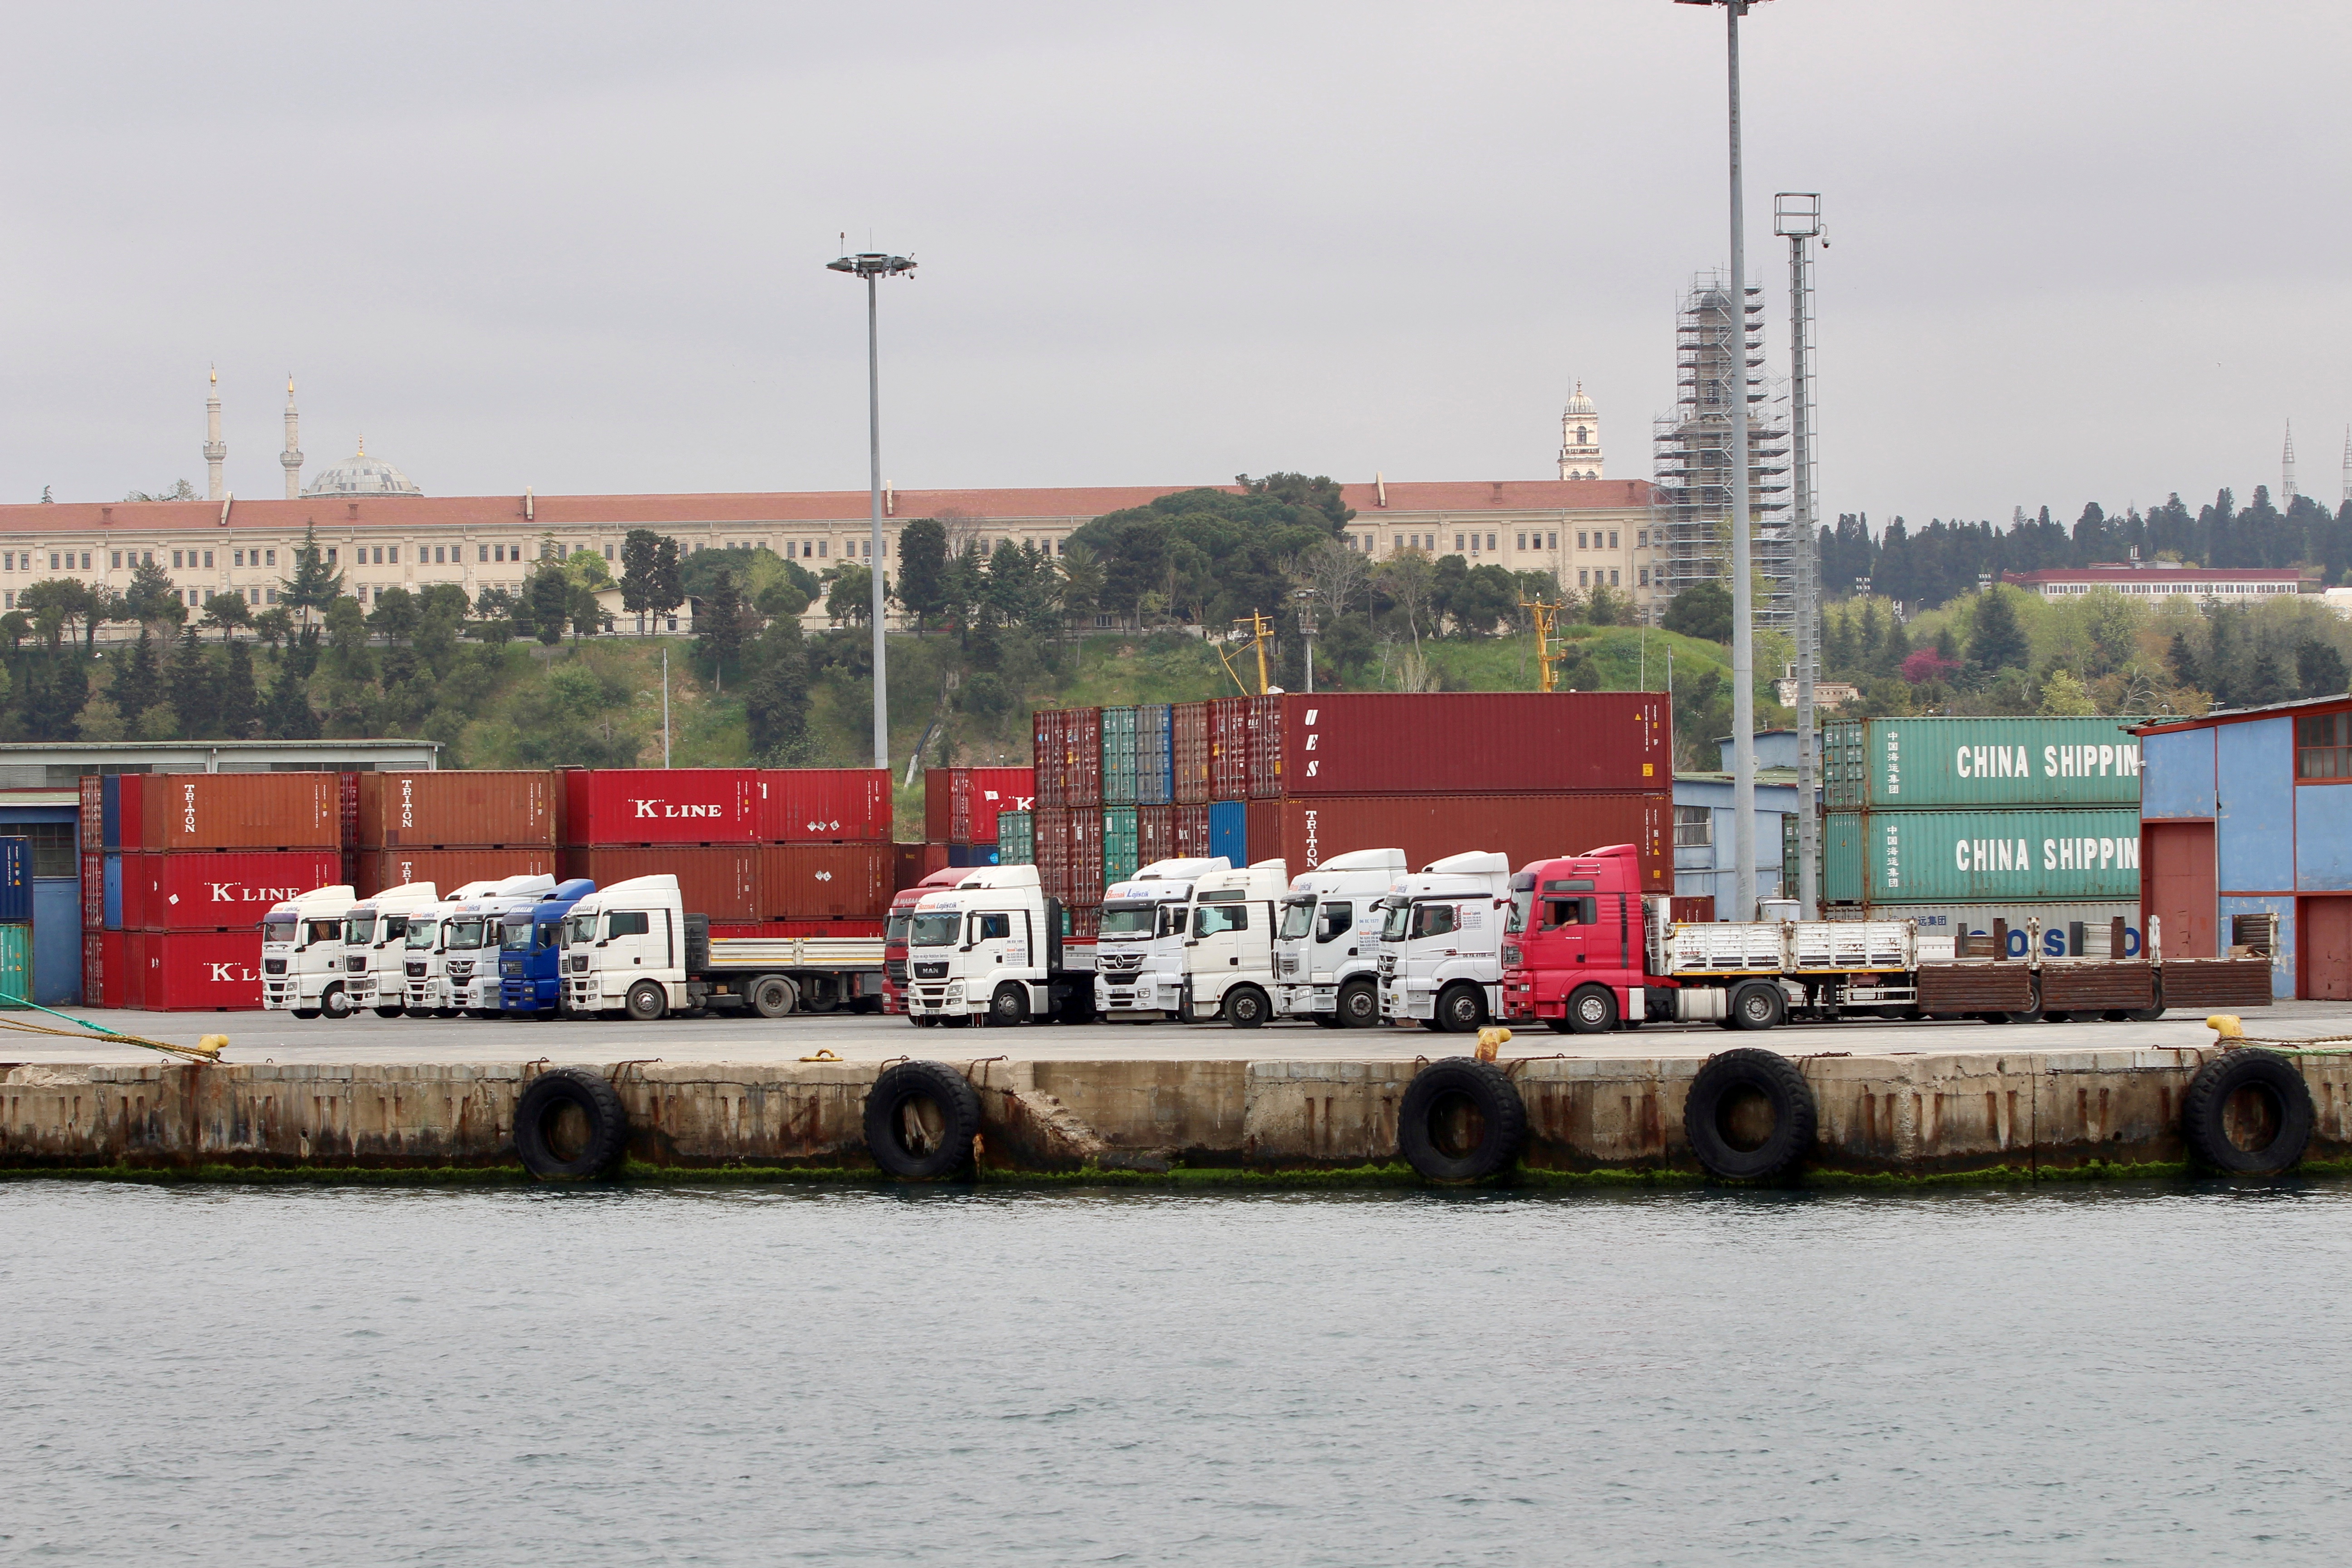 Trucks and shipping containers are pictured at Haydarpasa port in Istanbul